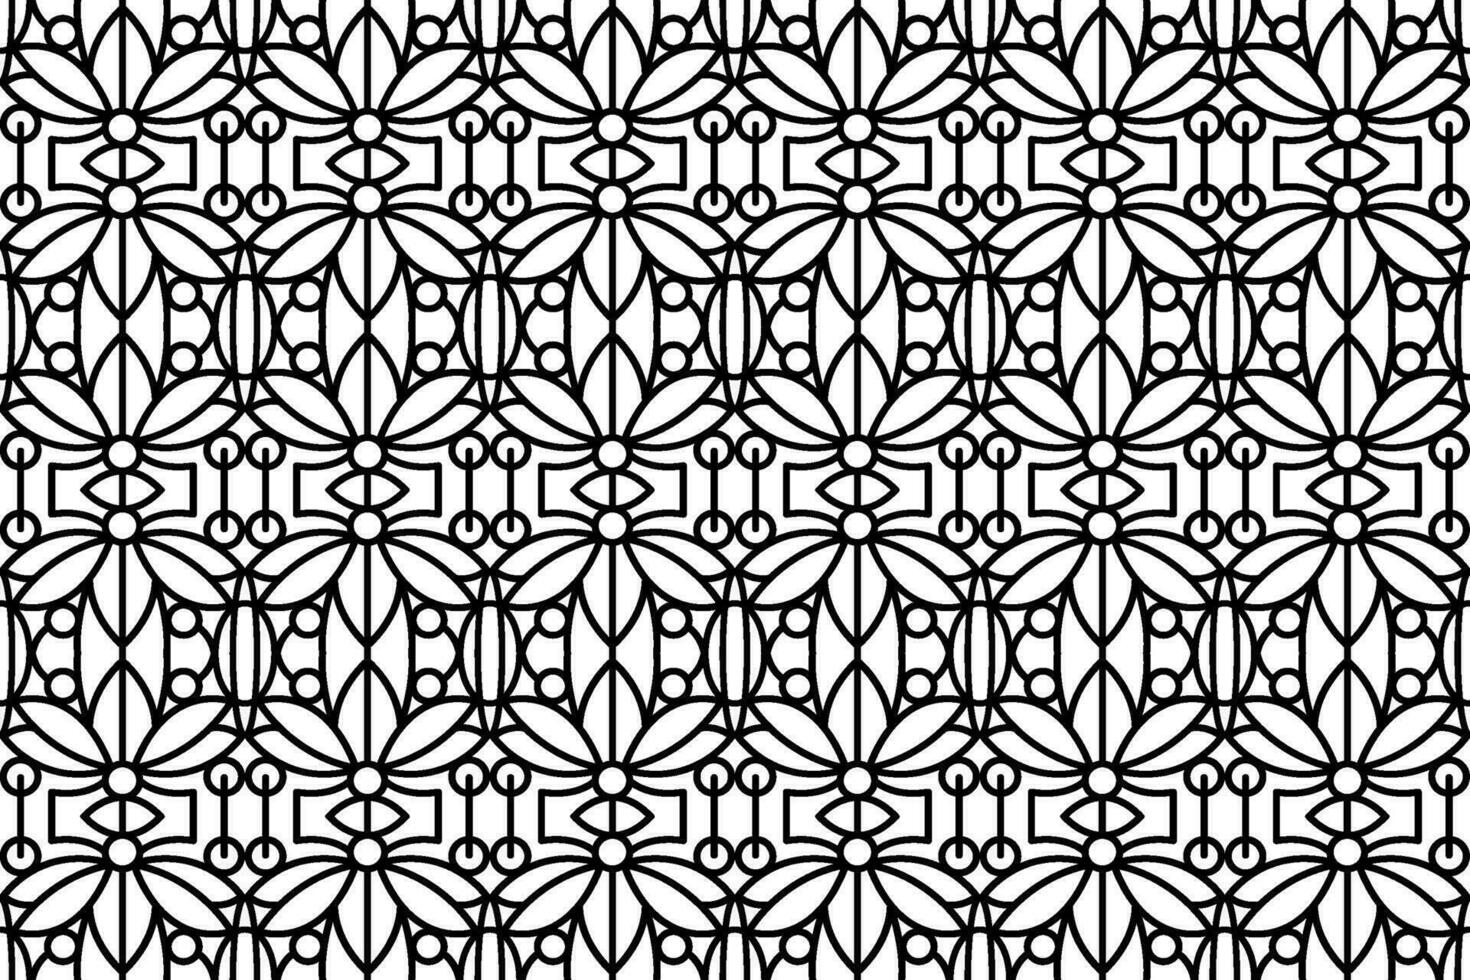 Lace, trim line art seamless pattern. Black and white abstract repeating pattern for wallpapers, textile, fabric, cover, backgrounds, printing and other designs. vector